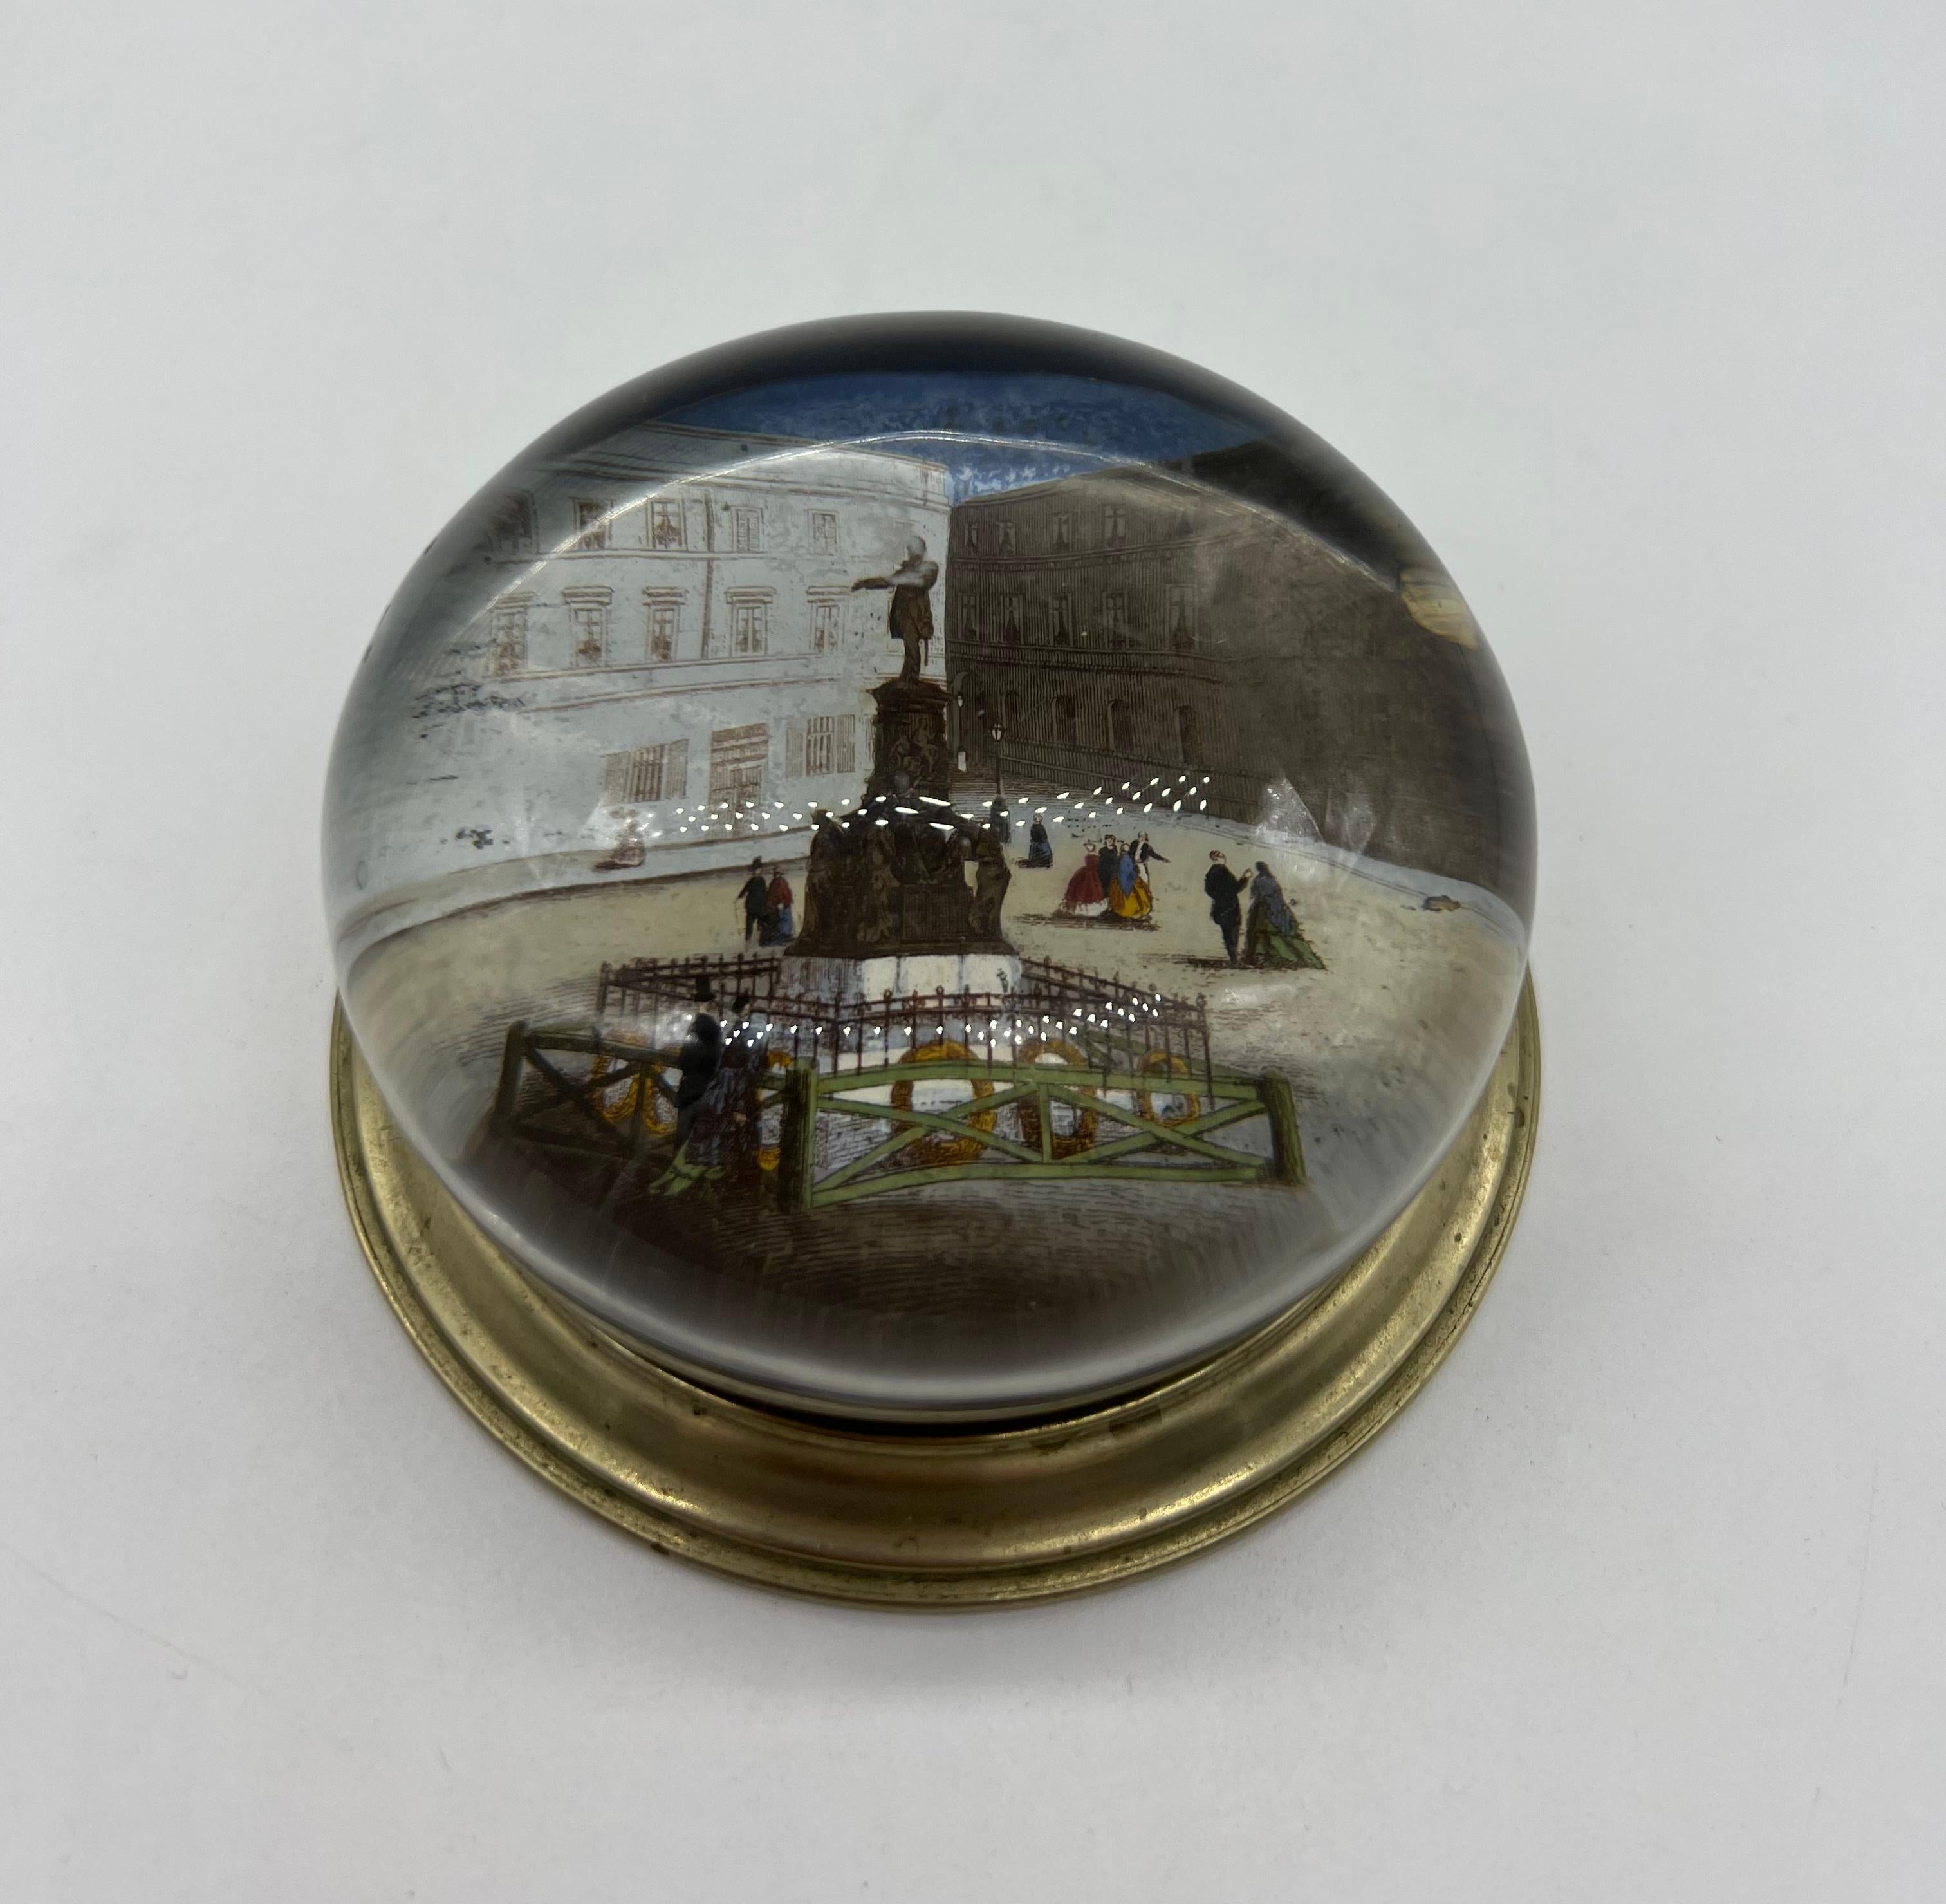 Antique rare paperweight glass ball with picture, alpaca base, good original condition, around 1880.